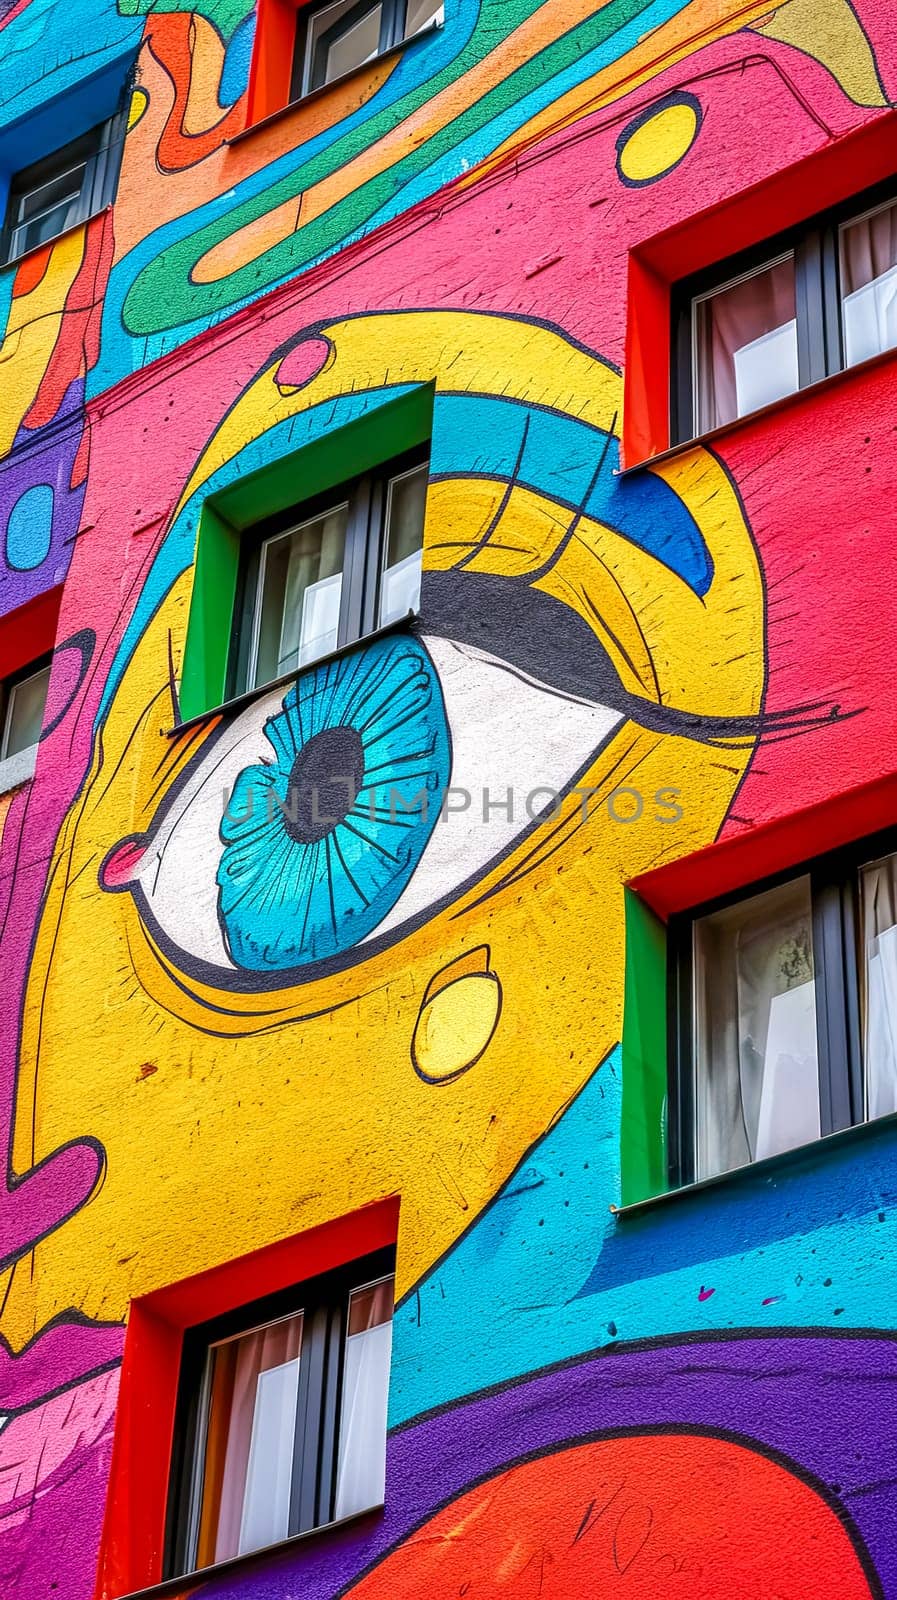 street art mural on an urban building facade, showcasing a large, colorful eye as the centerpiece surrounded by abstract shapes and patterns, vertical